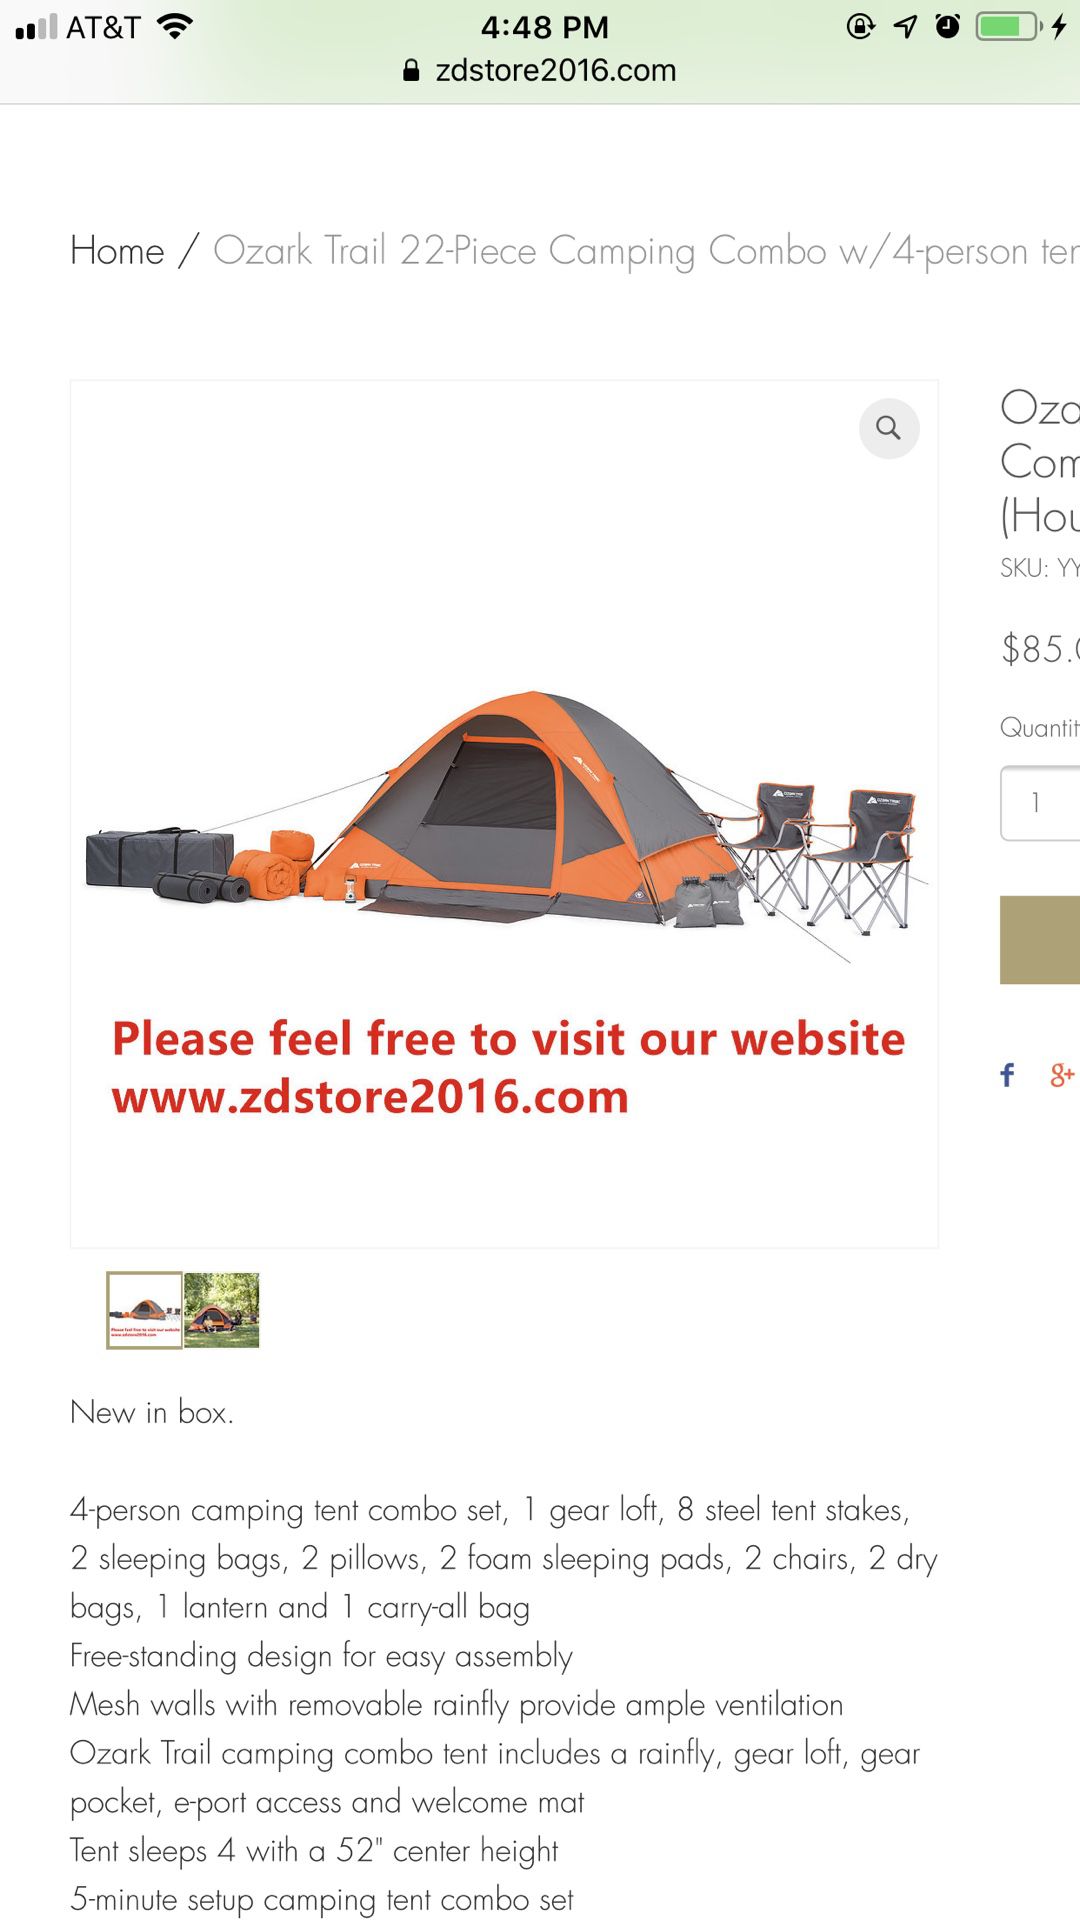 Ozark Trail 22-Piece Camping Combo w/4-person tent